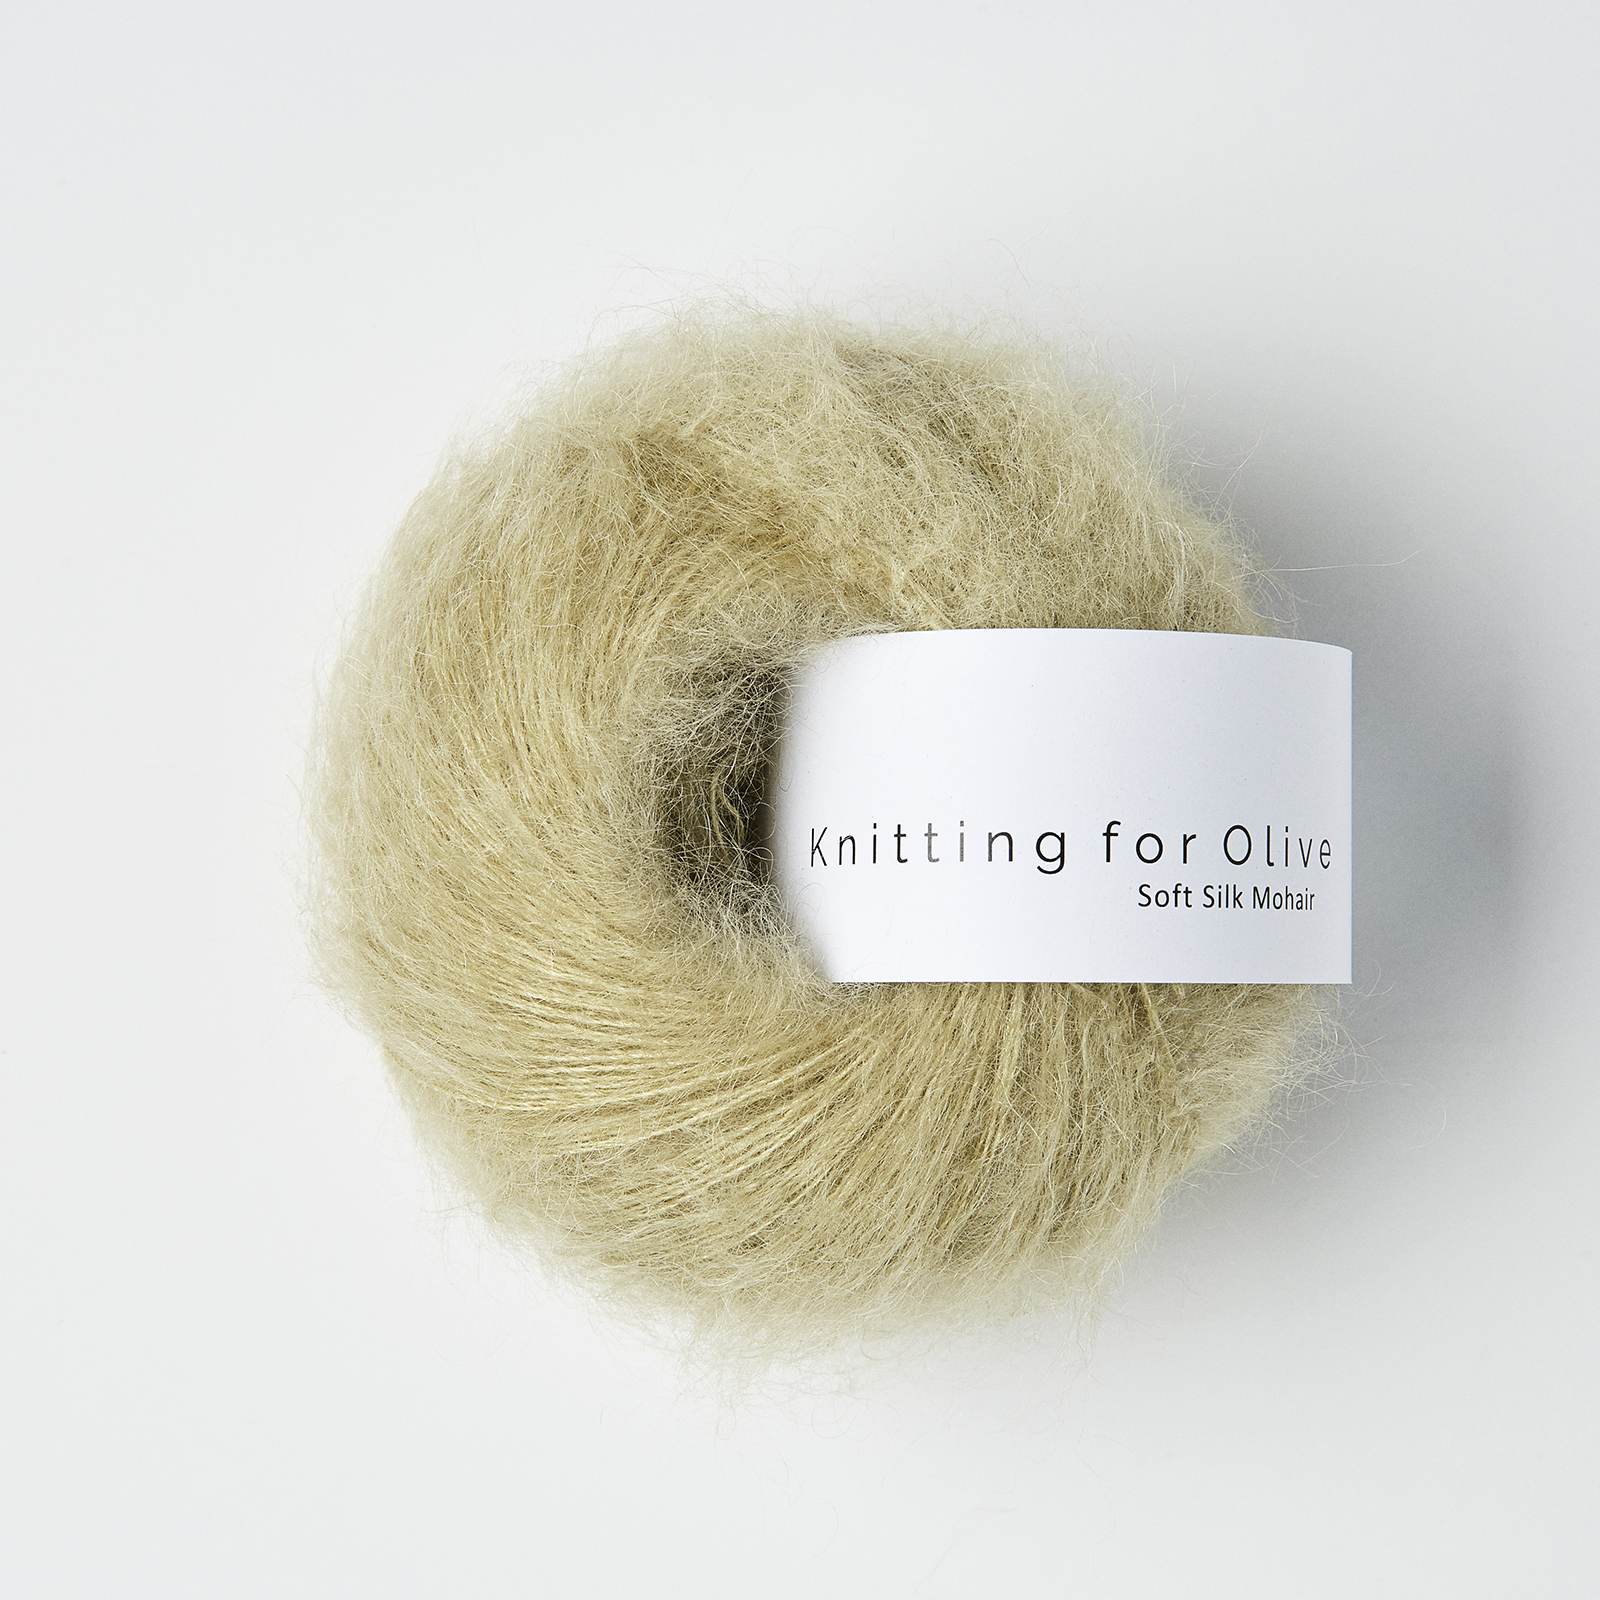 knitting for olive | soft silk mohair: fennel seed